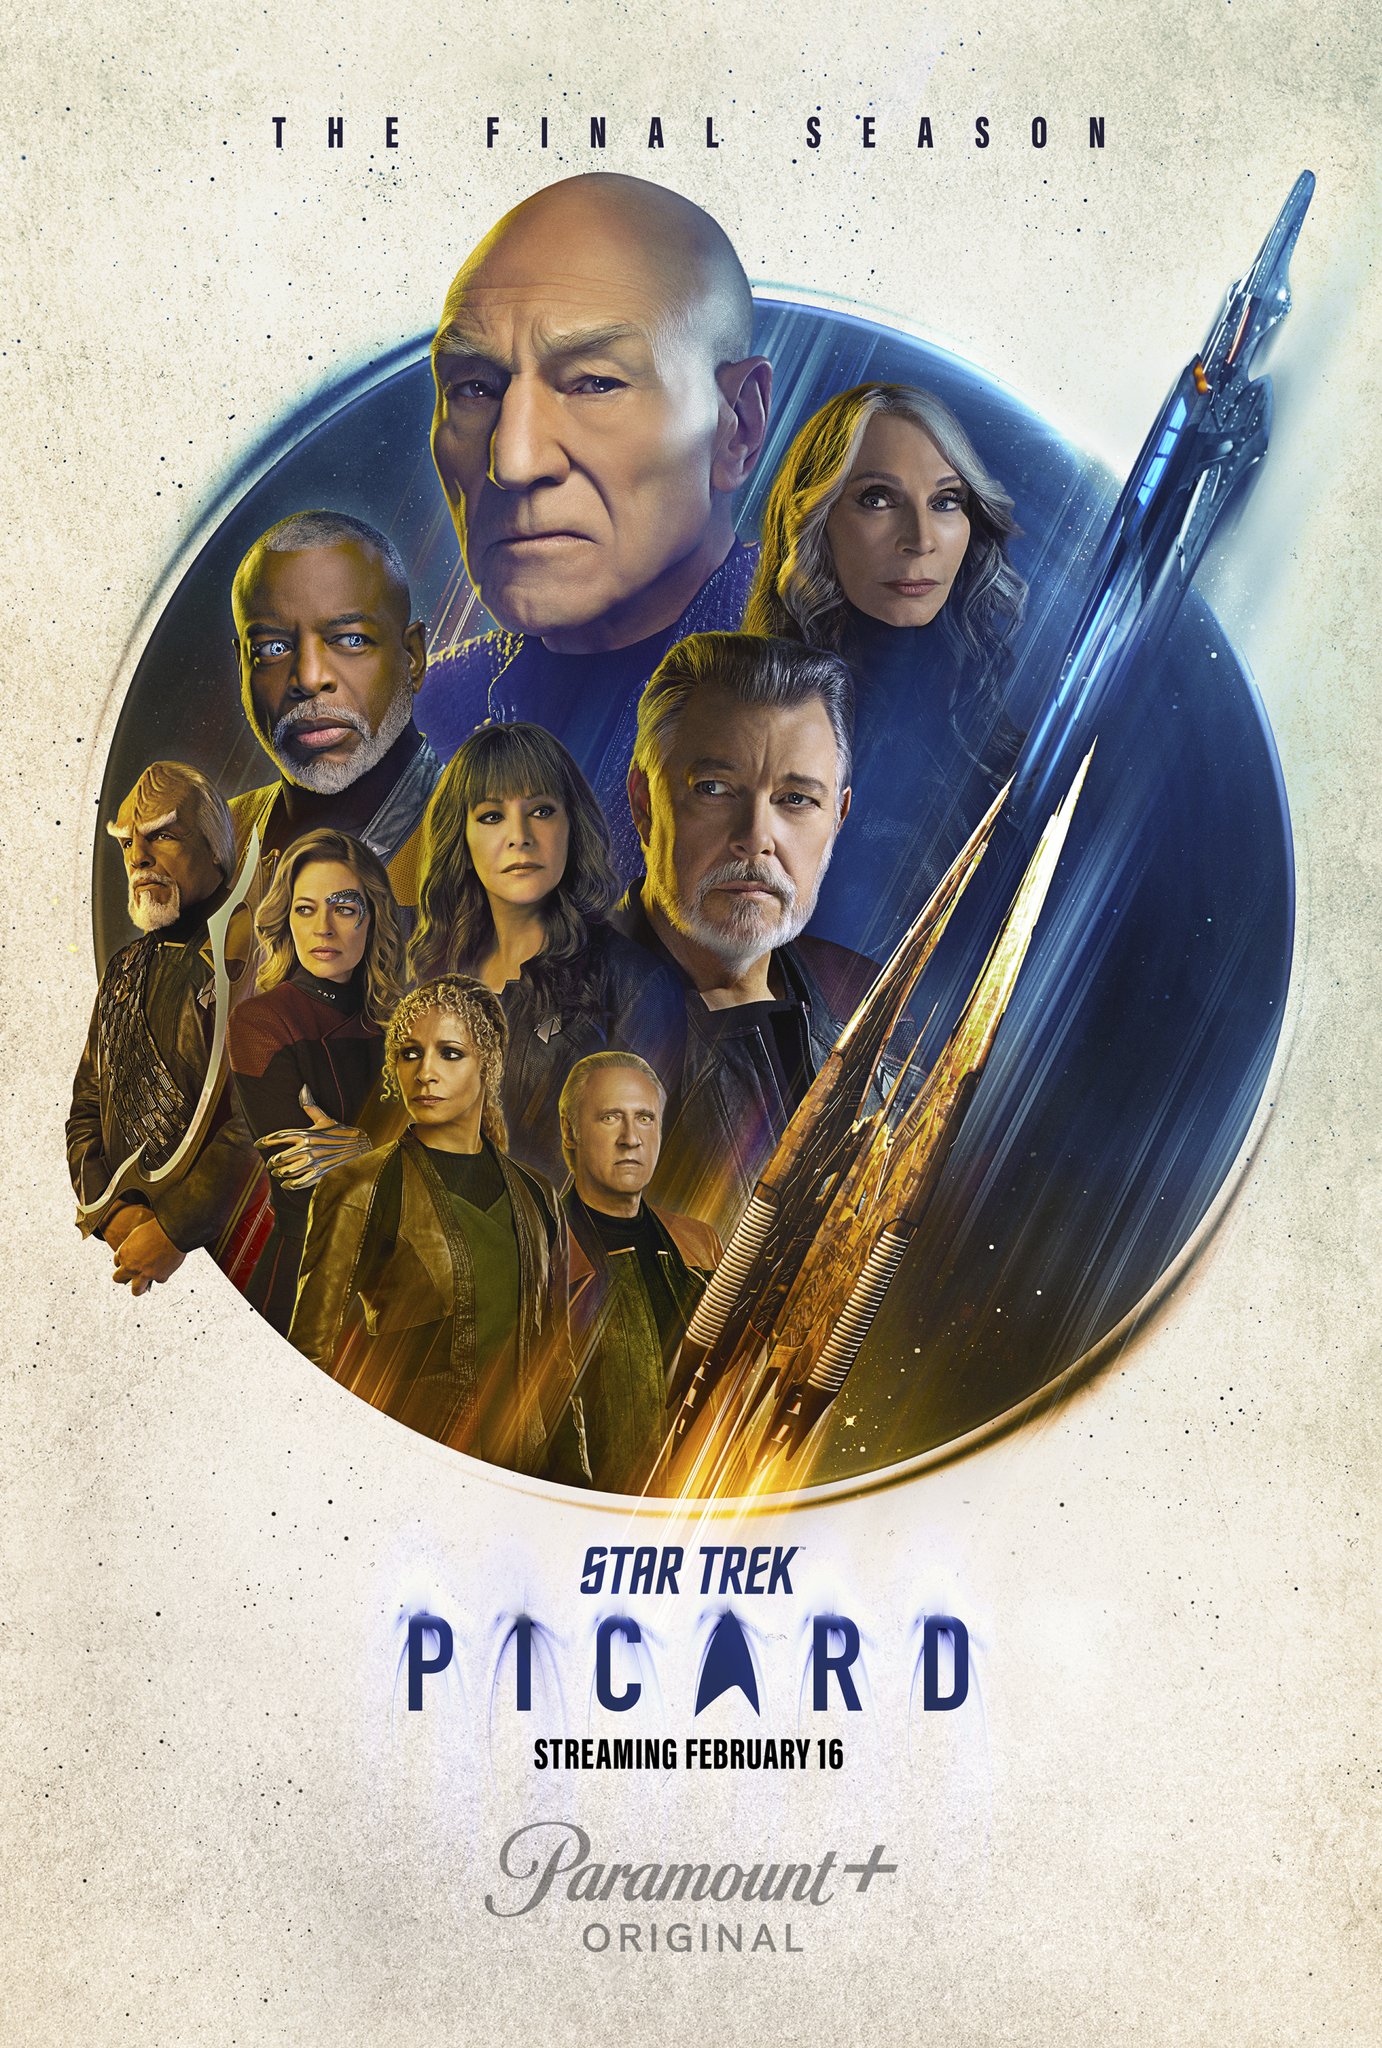 The Next Generation' Crew Are Together Again For The Official 'Star Trek: Picard' Season 3 Poster – TrekMovie.com